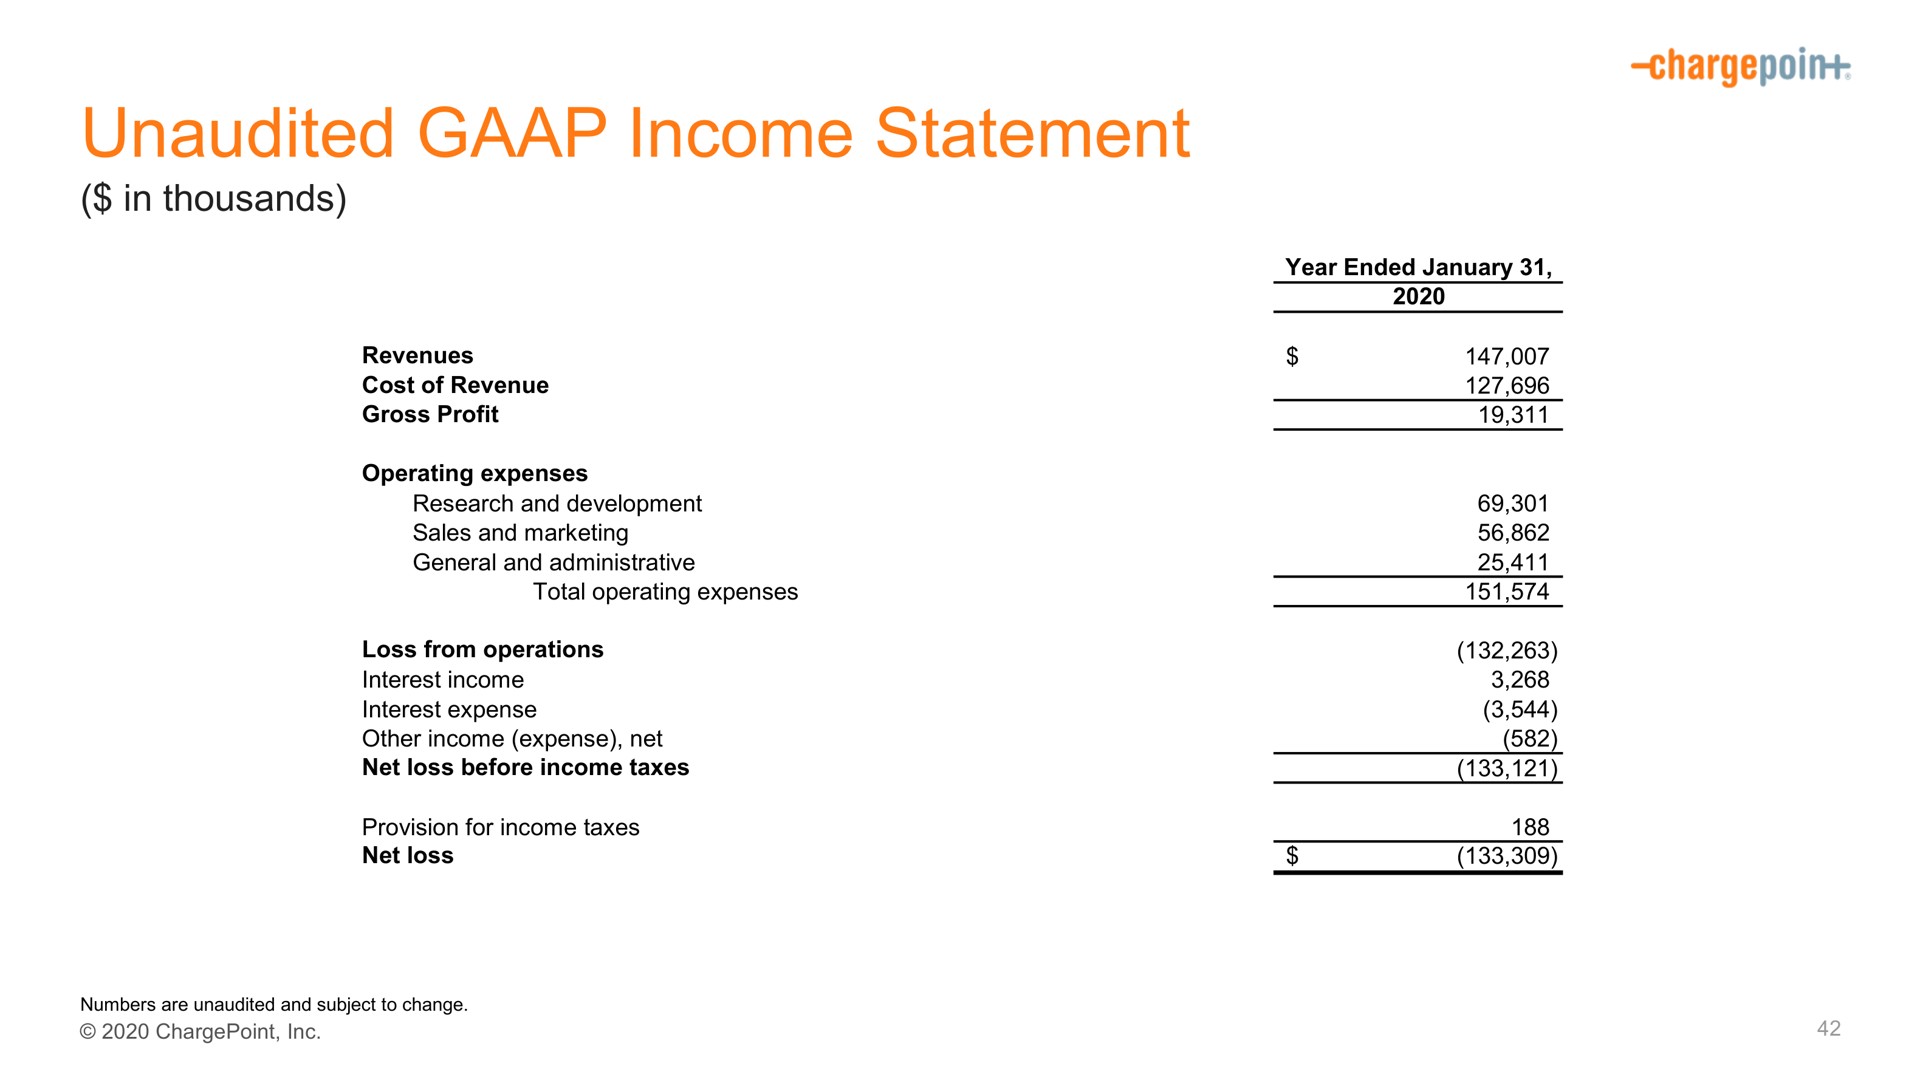 unaudited income statement | ChargePoint